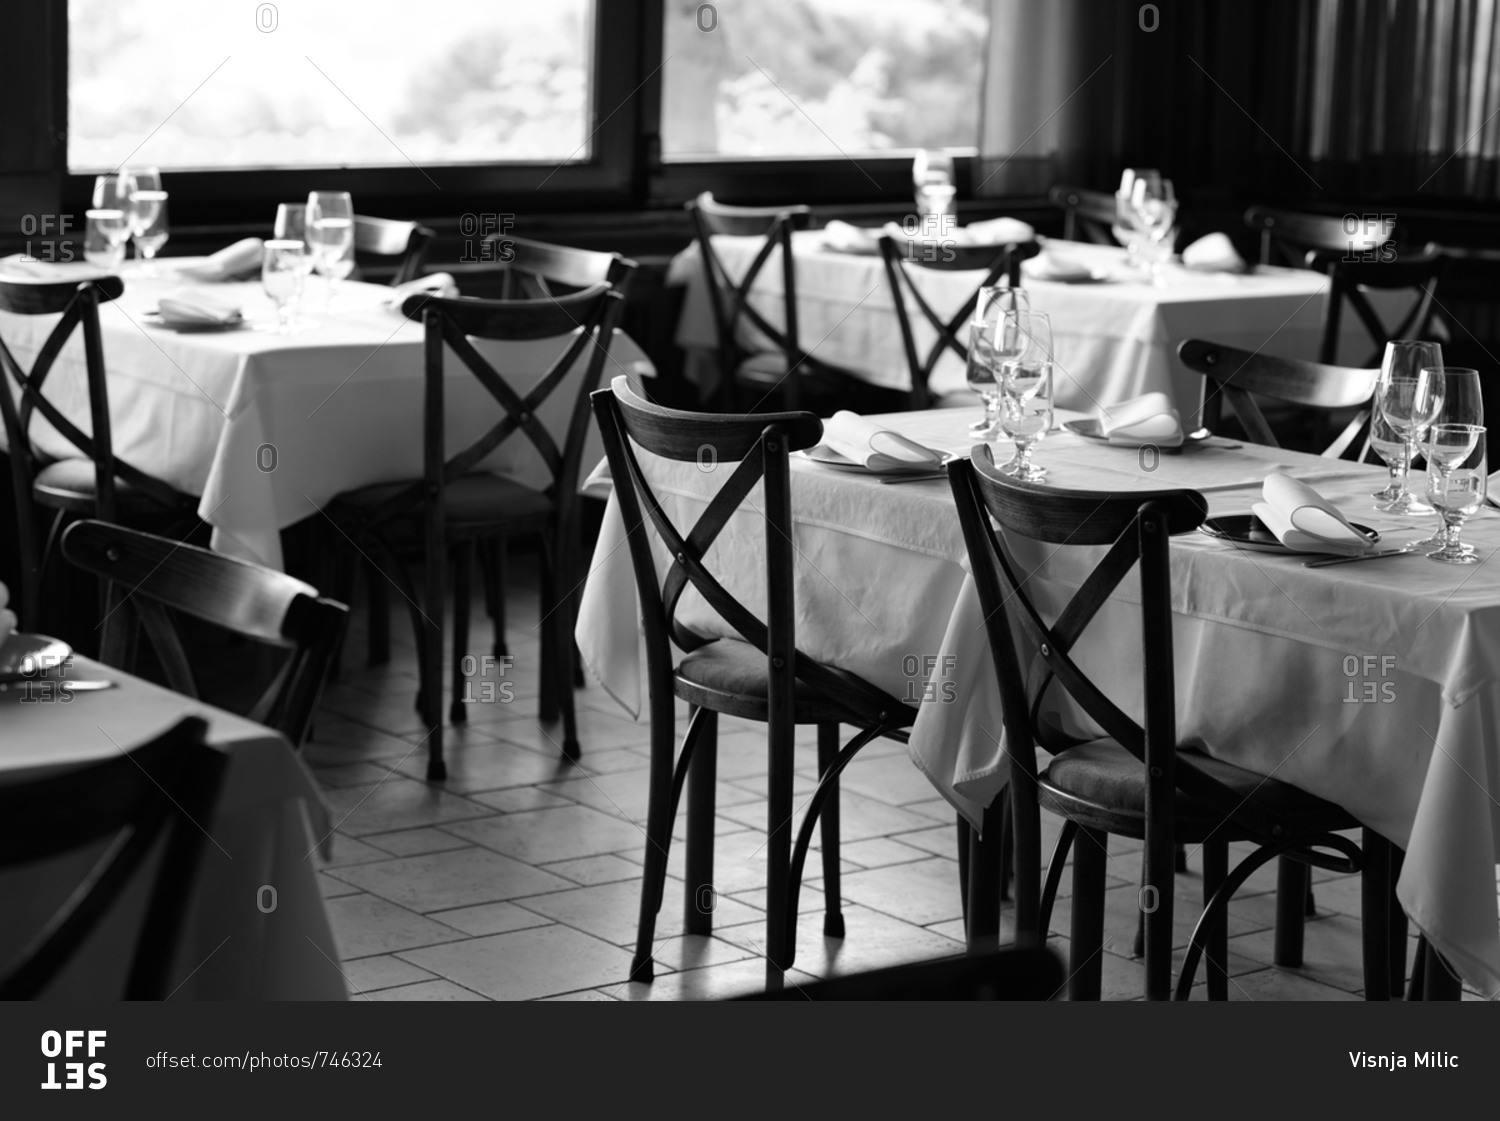 Black and white photo of restaurant interior with table settings